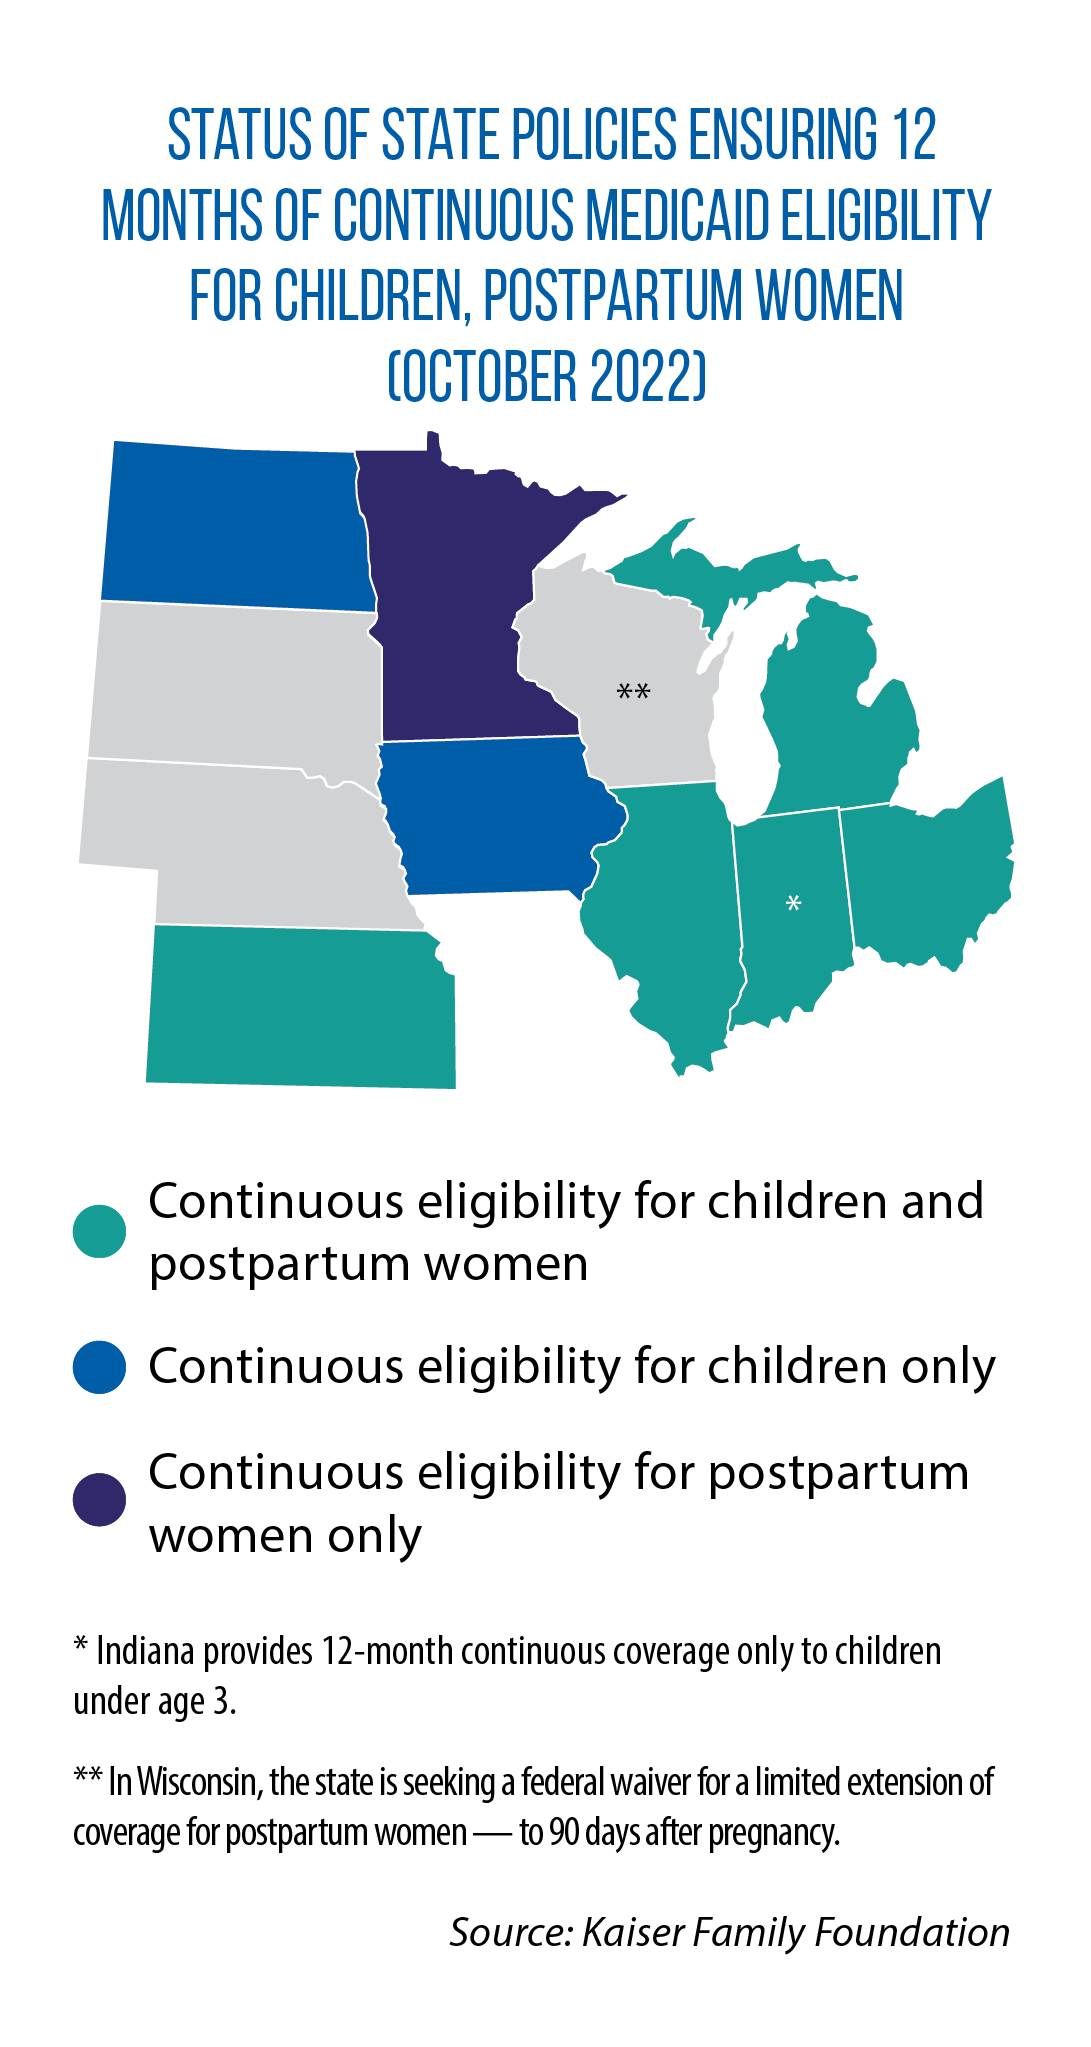 Midwestern state policies on 12-month continuous Medicaid enrollment for children & post-partum women, as of October 2022